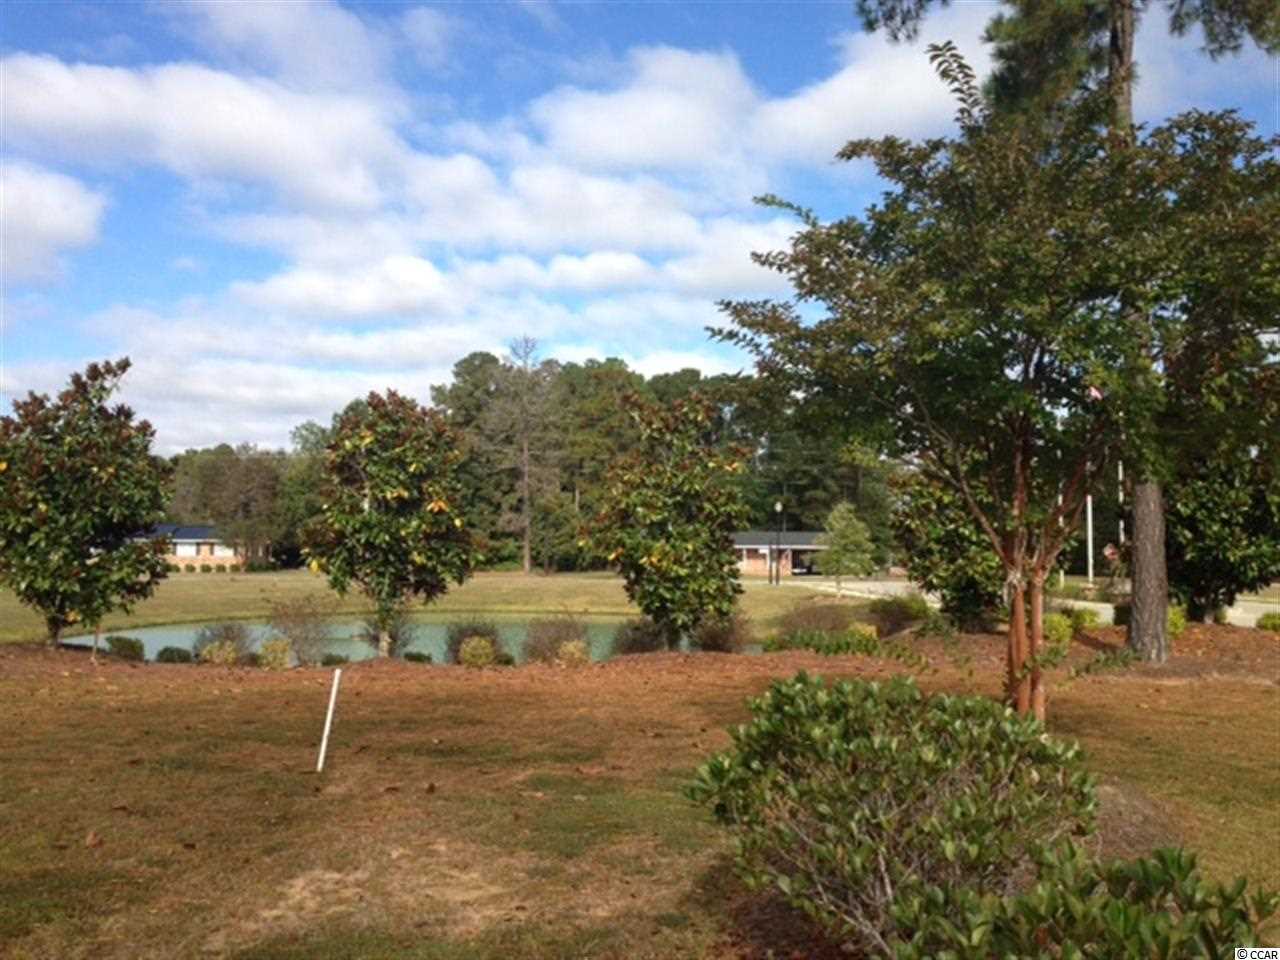 LOT 46 Ivy Lea Dr. Conway, SC 29526